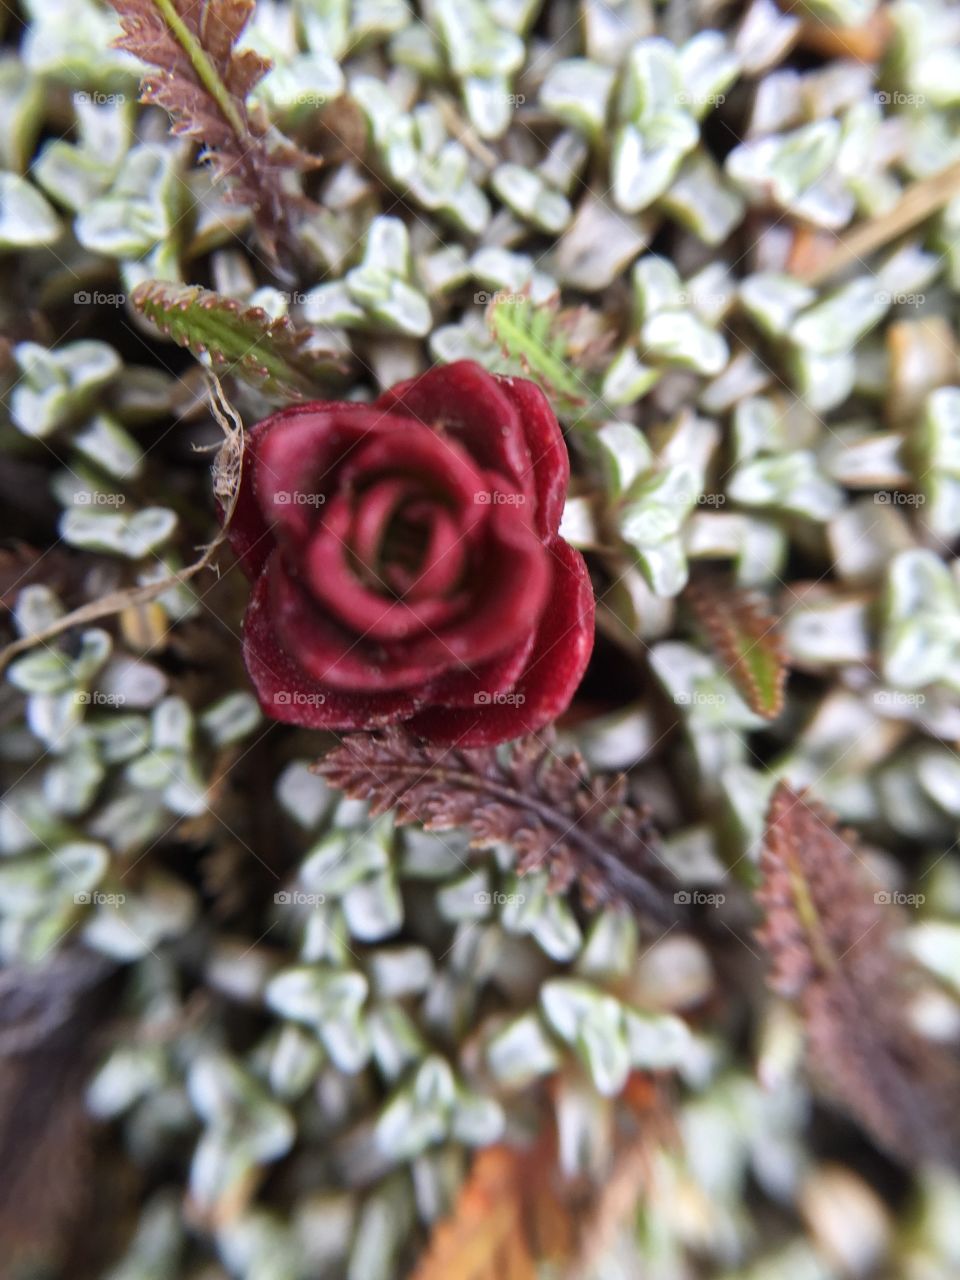 Patterns in nature. Red succulent that looks like a rose.